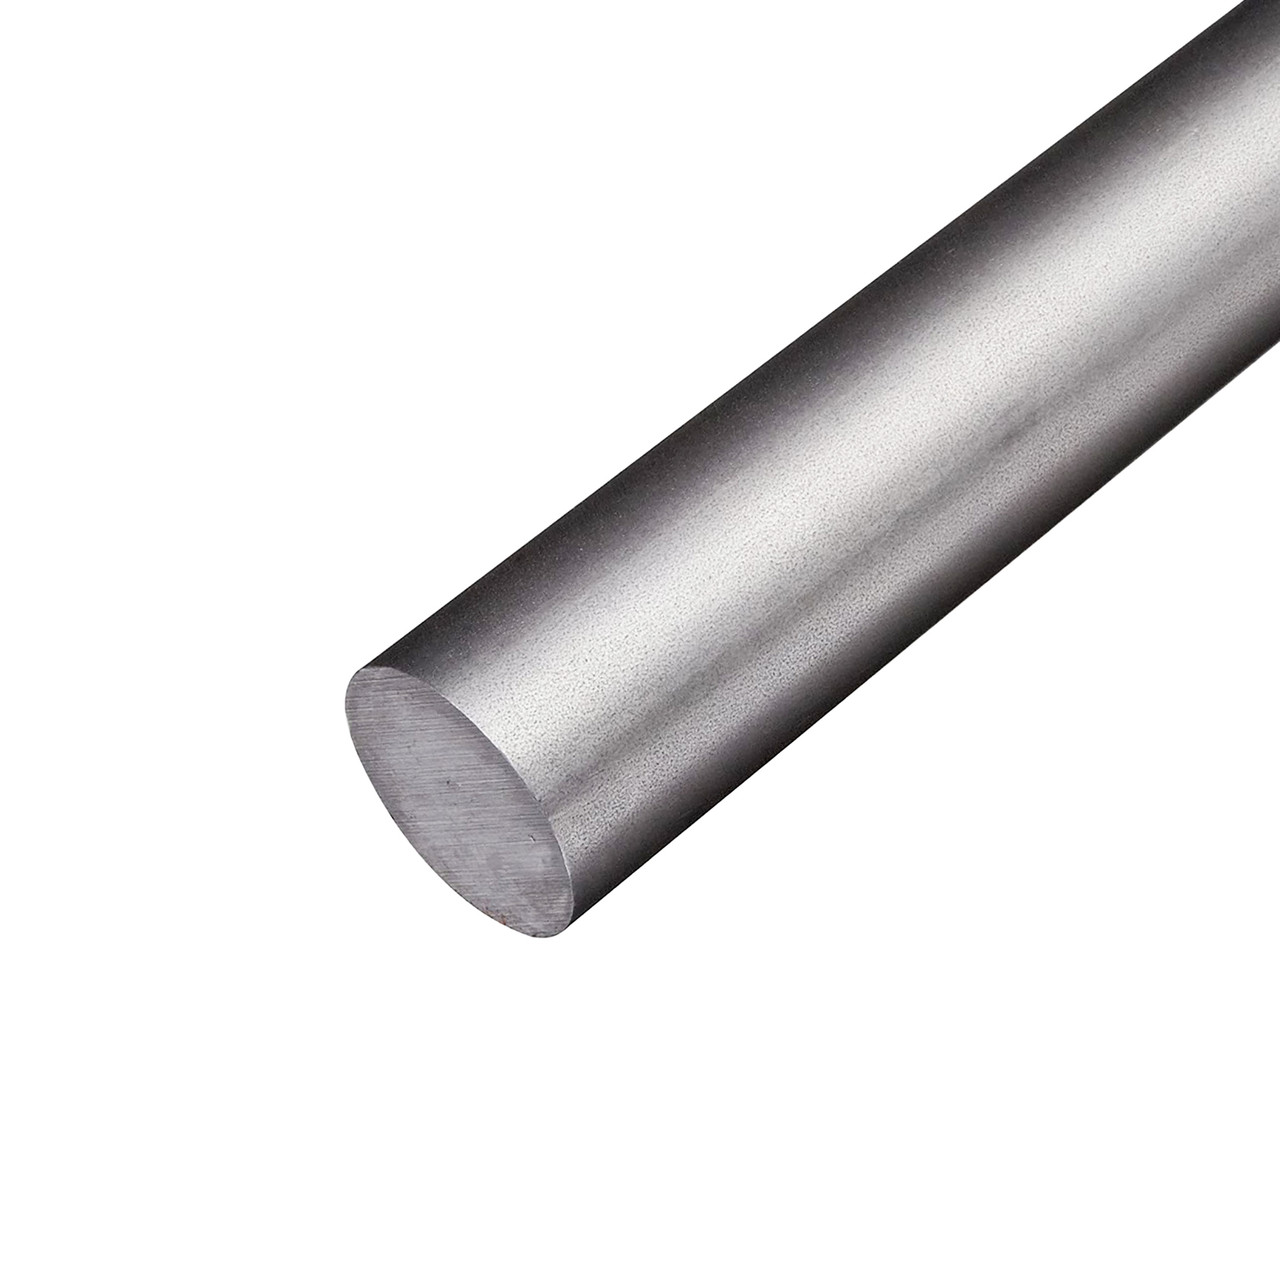 1.625 (1-5/8 inch) x 5.5 inches, 1045 Steel Round Rod, Cold Finished